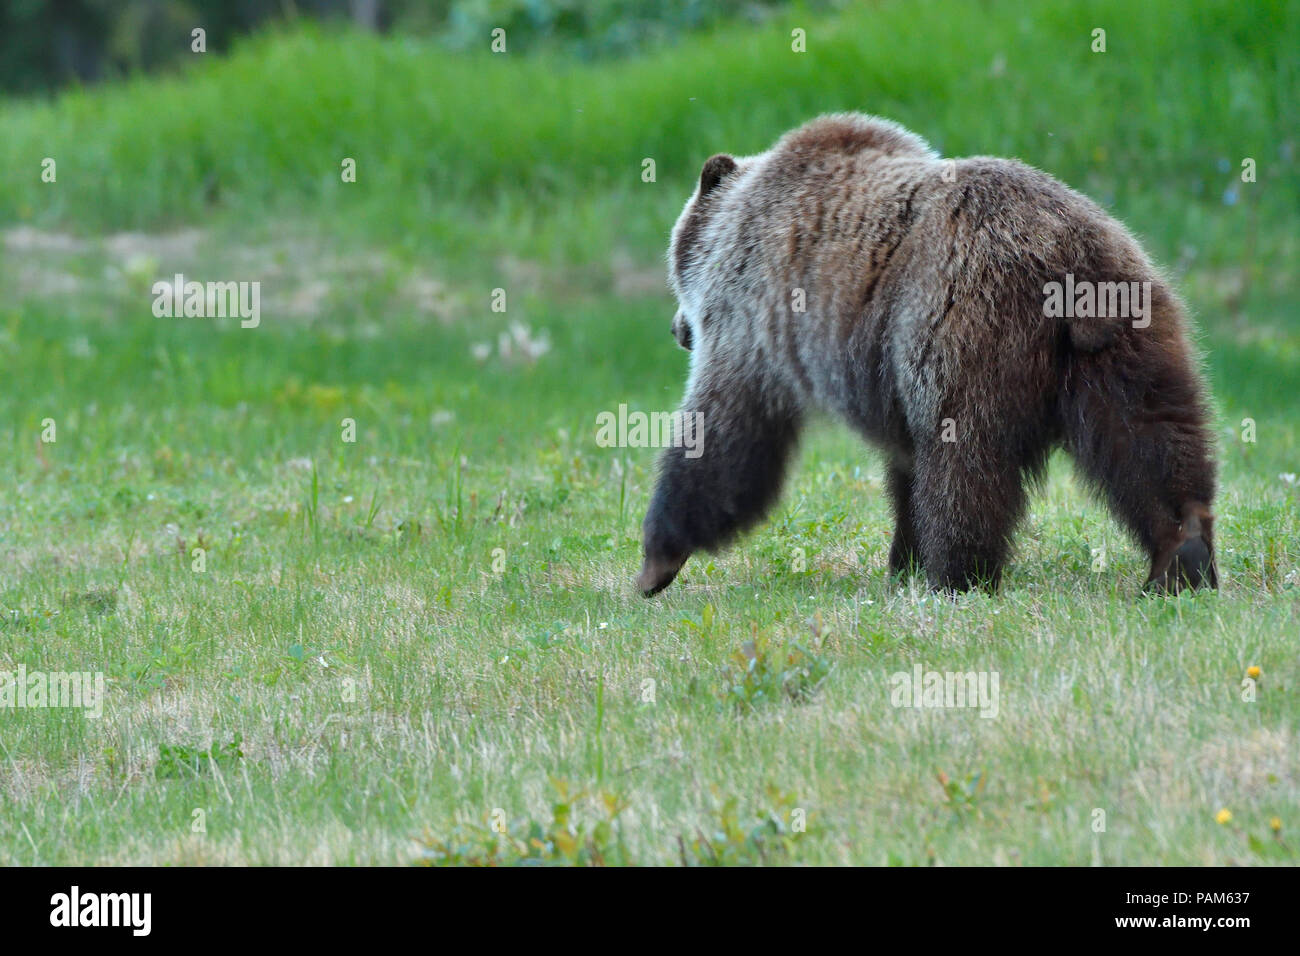 A rear view of a grizzly bear ( Ursus arctos); walking away through the green grass at the edge of the forest in Alberta Canada Stock Photo